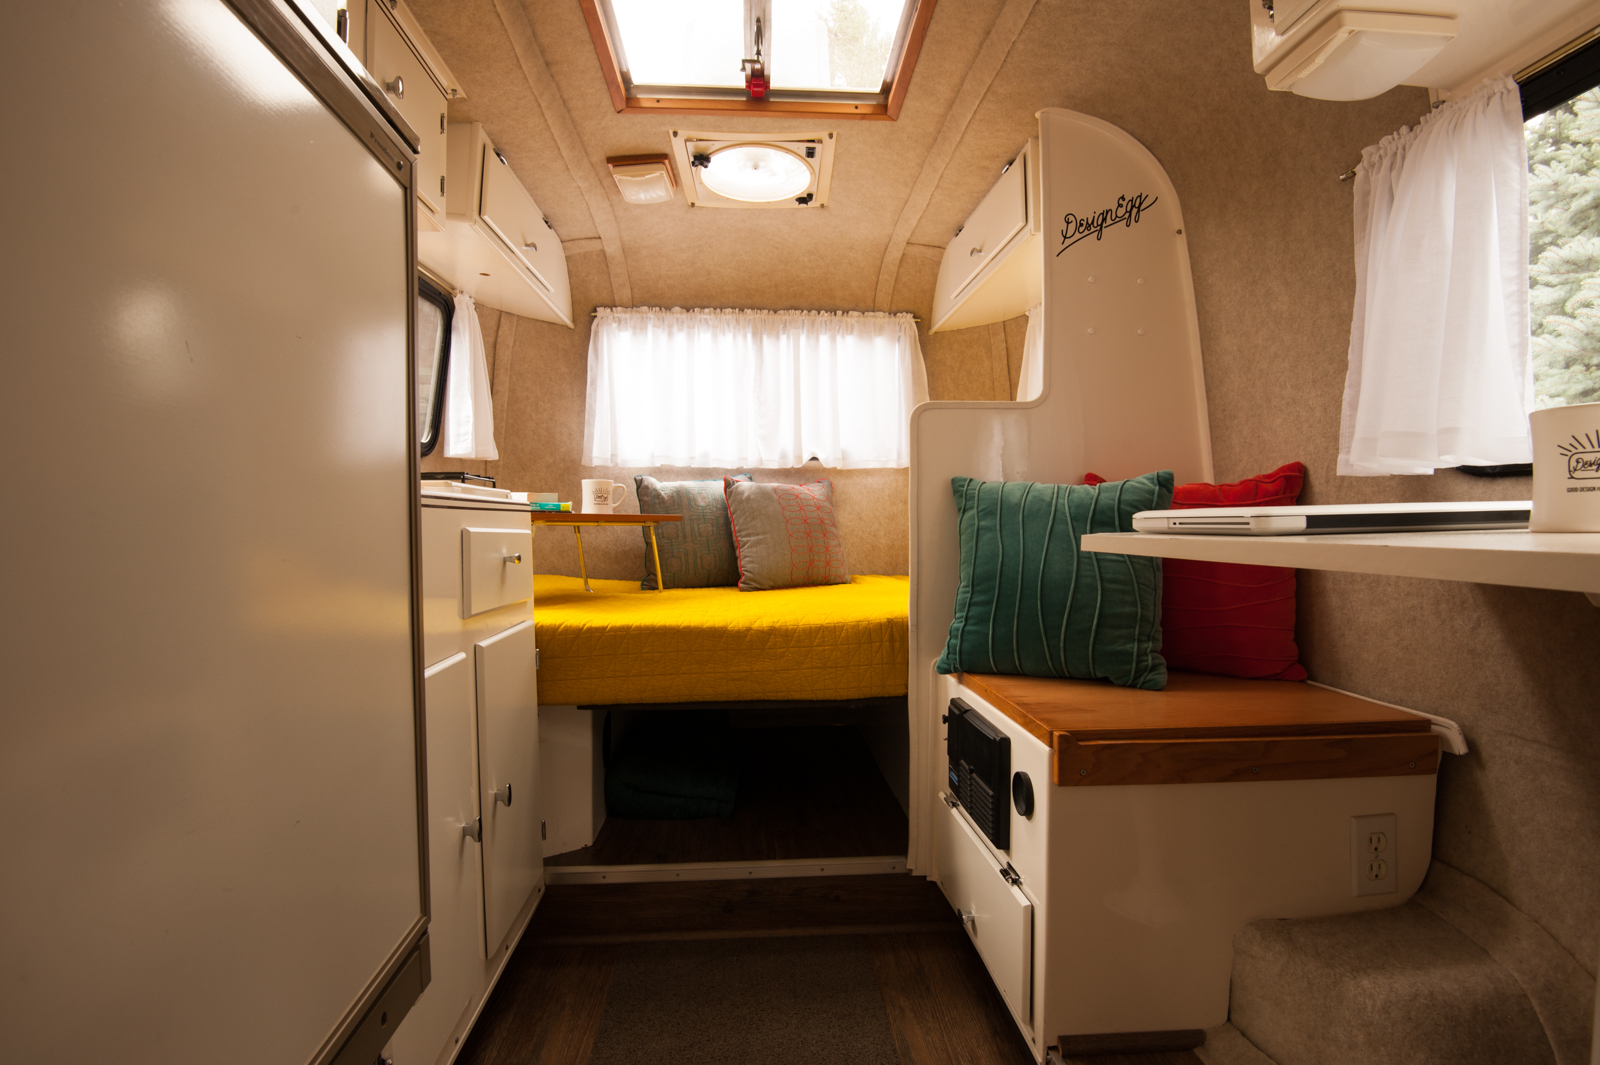 Dirtbag Dwellings: Meet the "Egg" — A Renovated Scamp RV ...